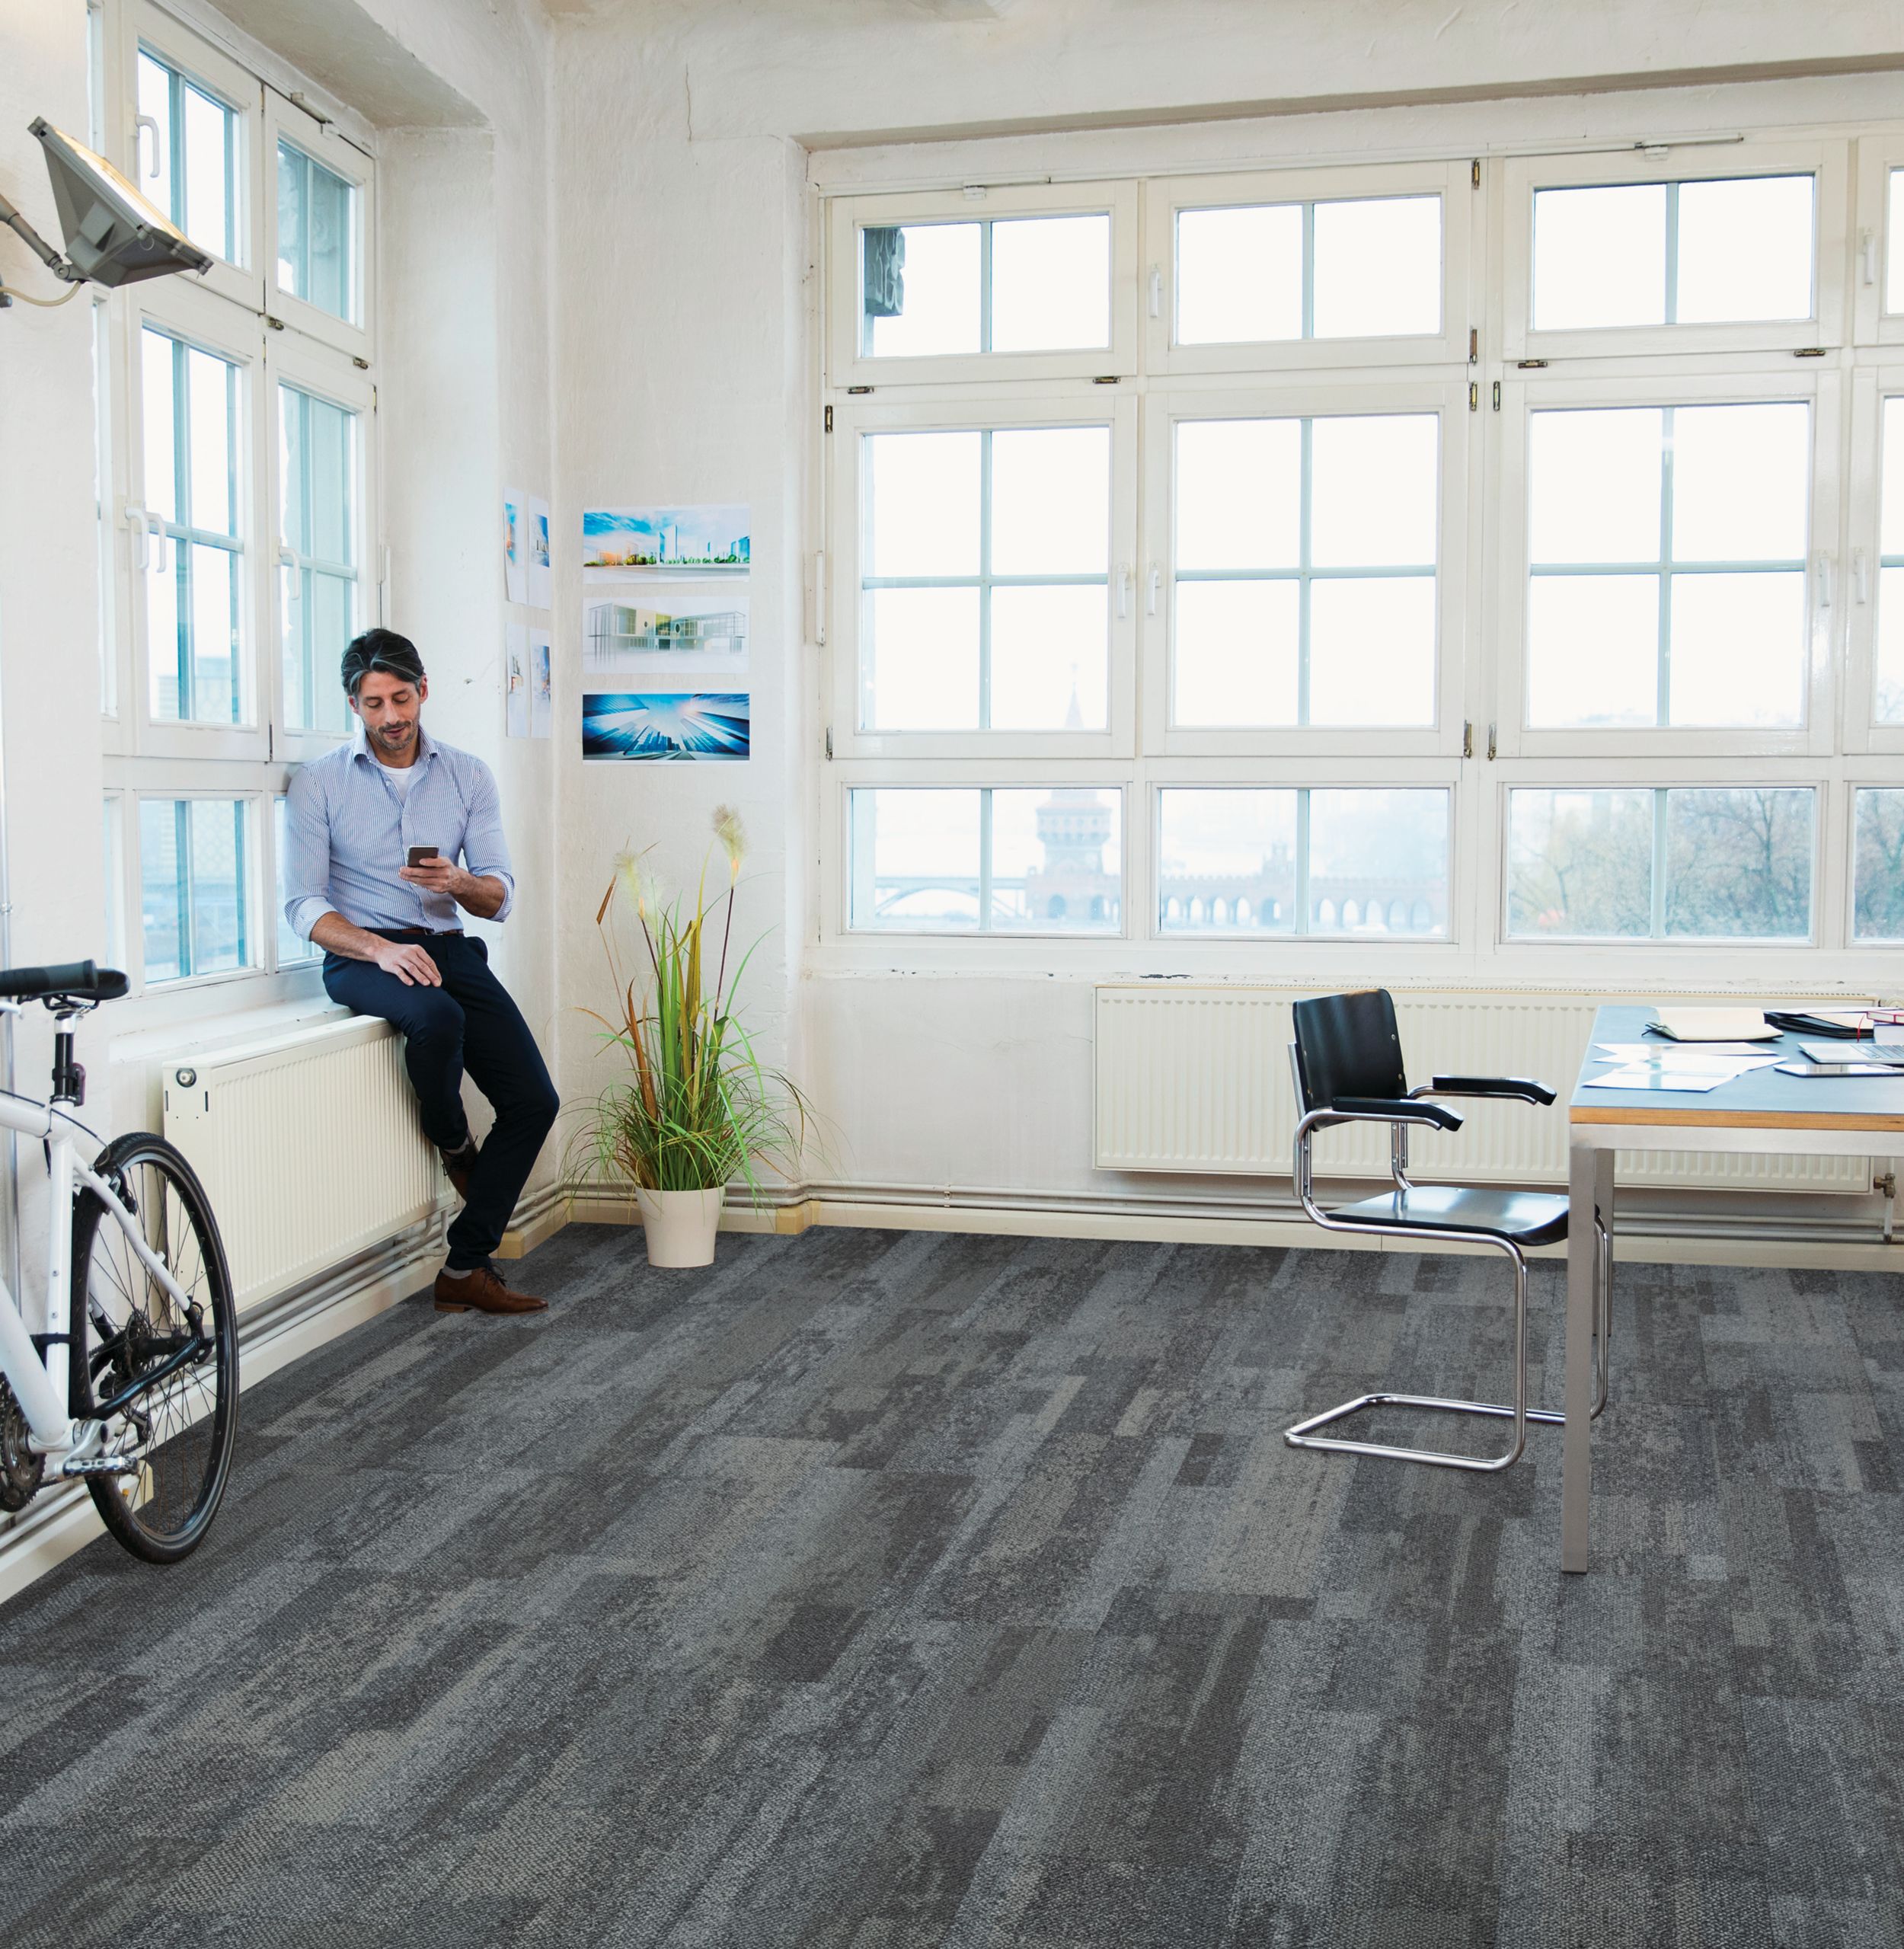 Interface Naturally Weathered plank carpet tile in office space with man looking at phone on window sill imagen número 6